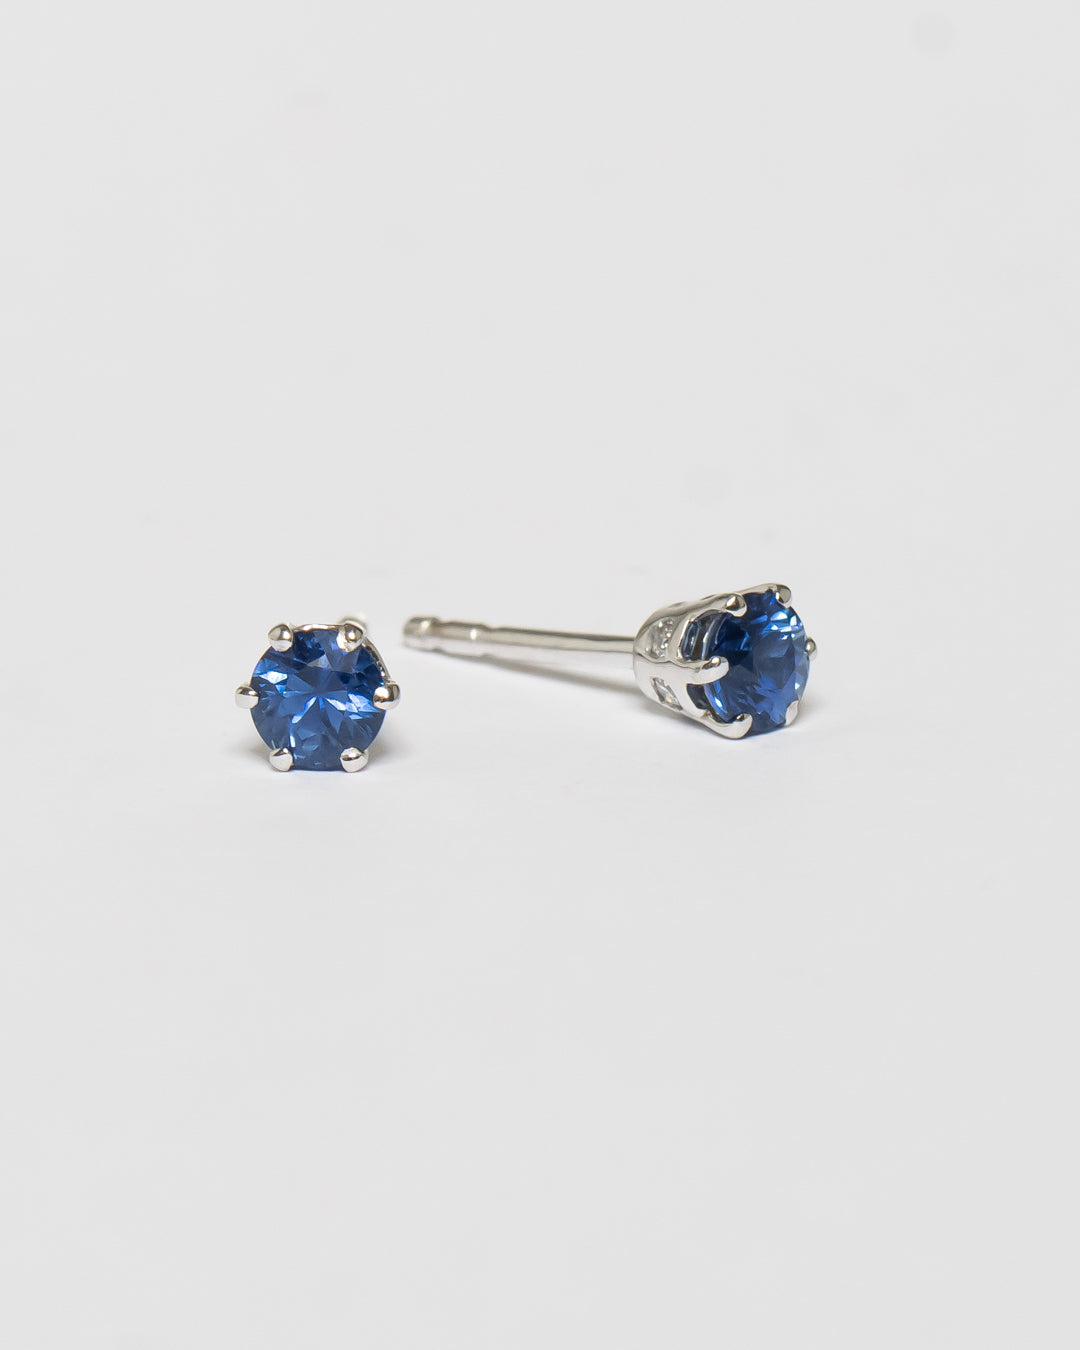 JR Solitaire Collection - Earrings Sapphire x Whitegold